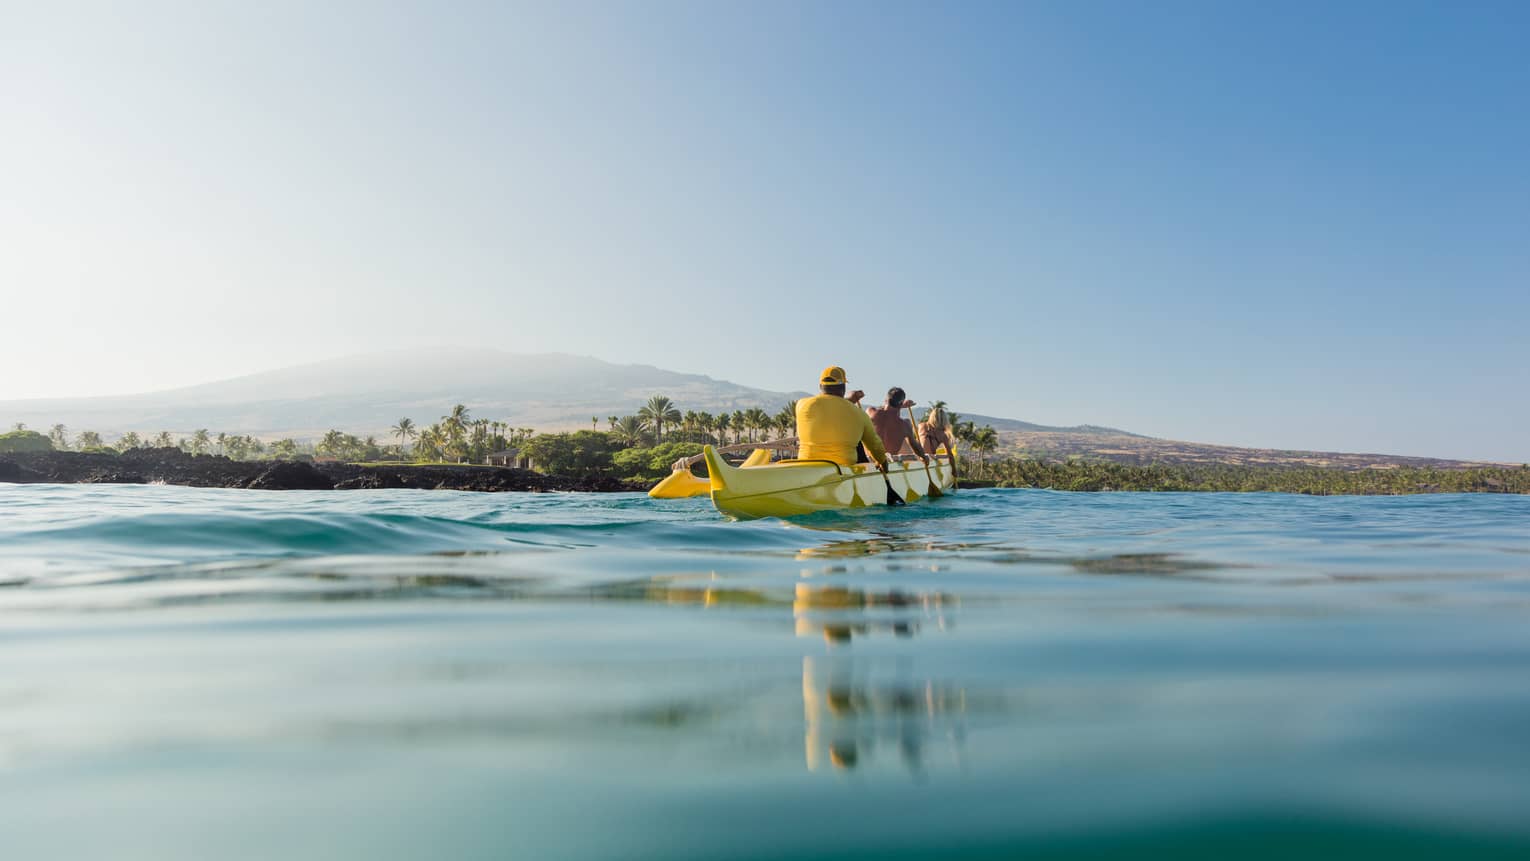 A group of guests take a canoe out on the water